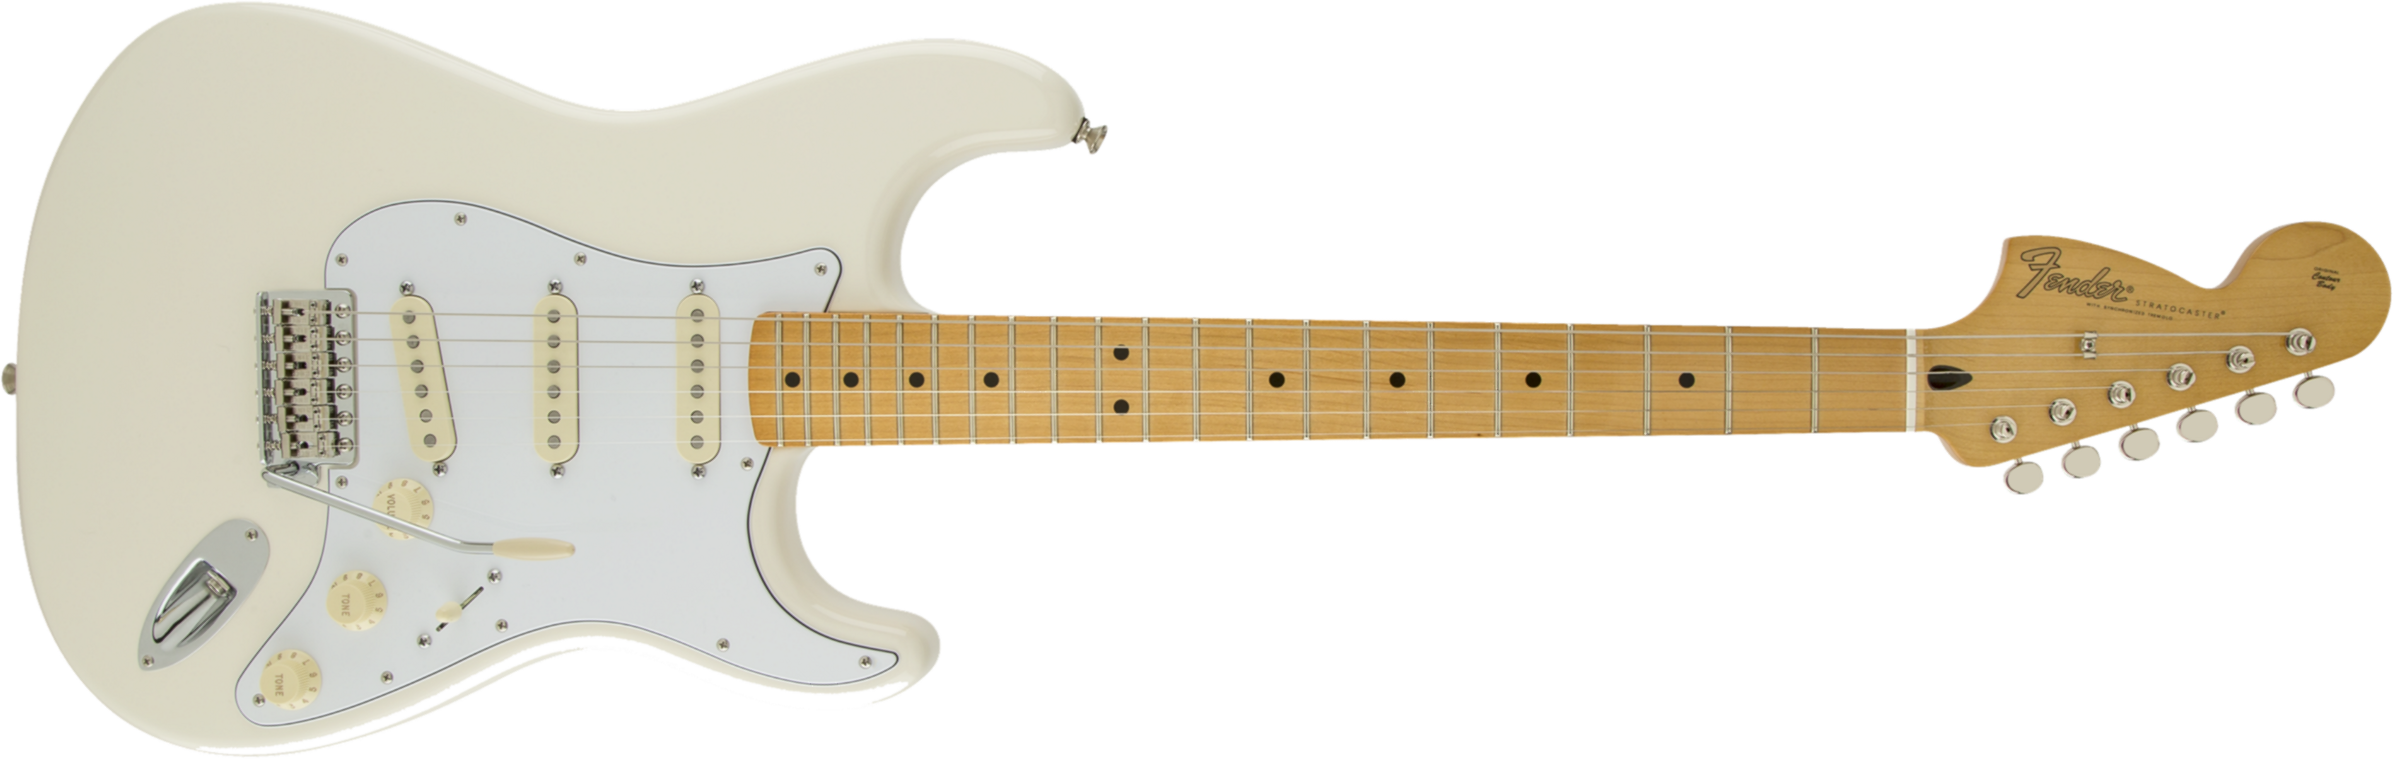 Fender Jimi Hendrix Stratocaster (mex, Mn) - Olympic White - Guitare Électrique Forme Str - Main picture